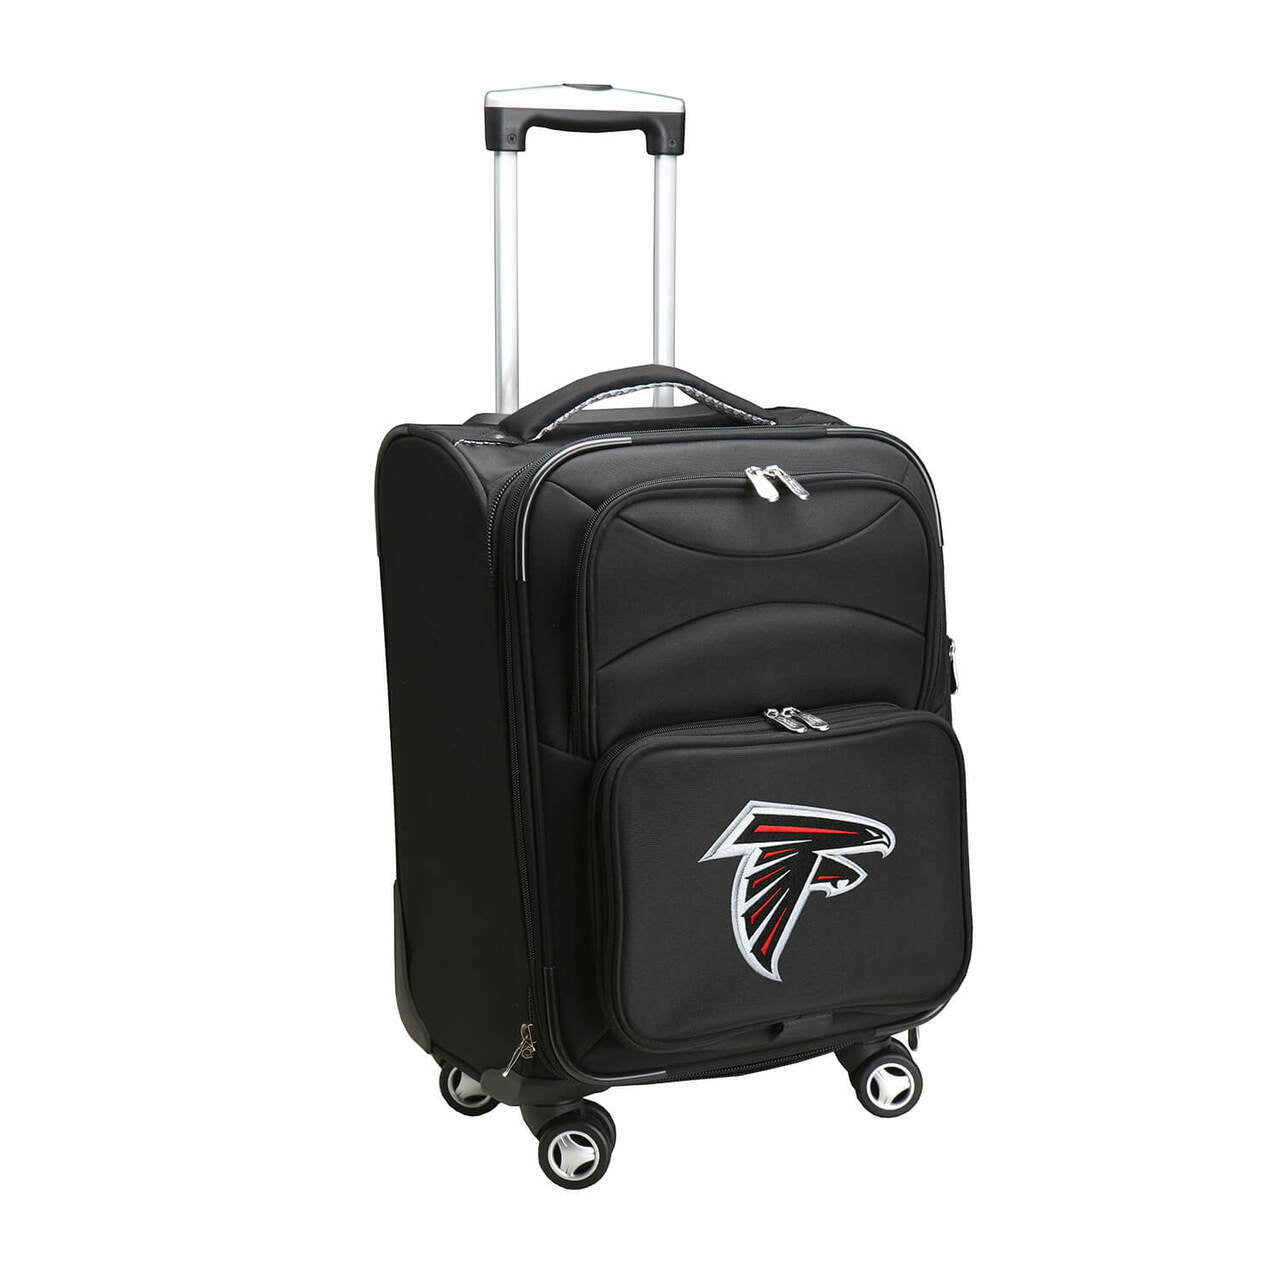 Atlanta Falcons 21" Carry-on Spinner Luggage